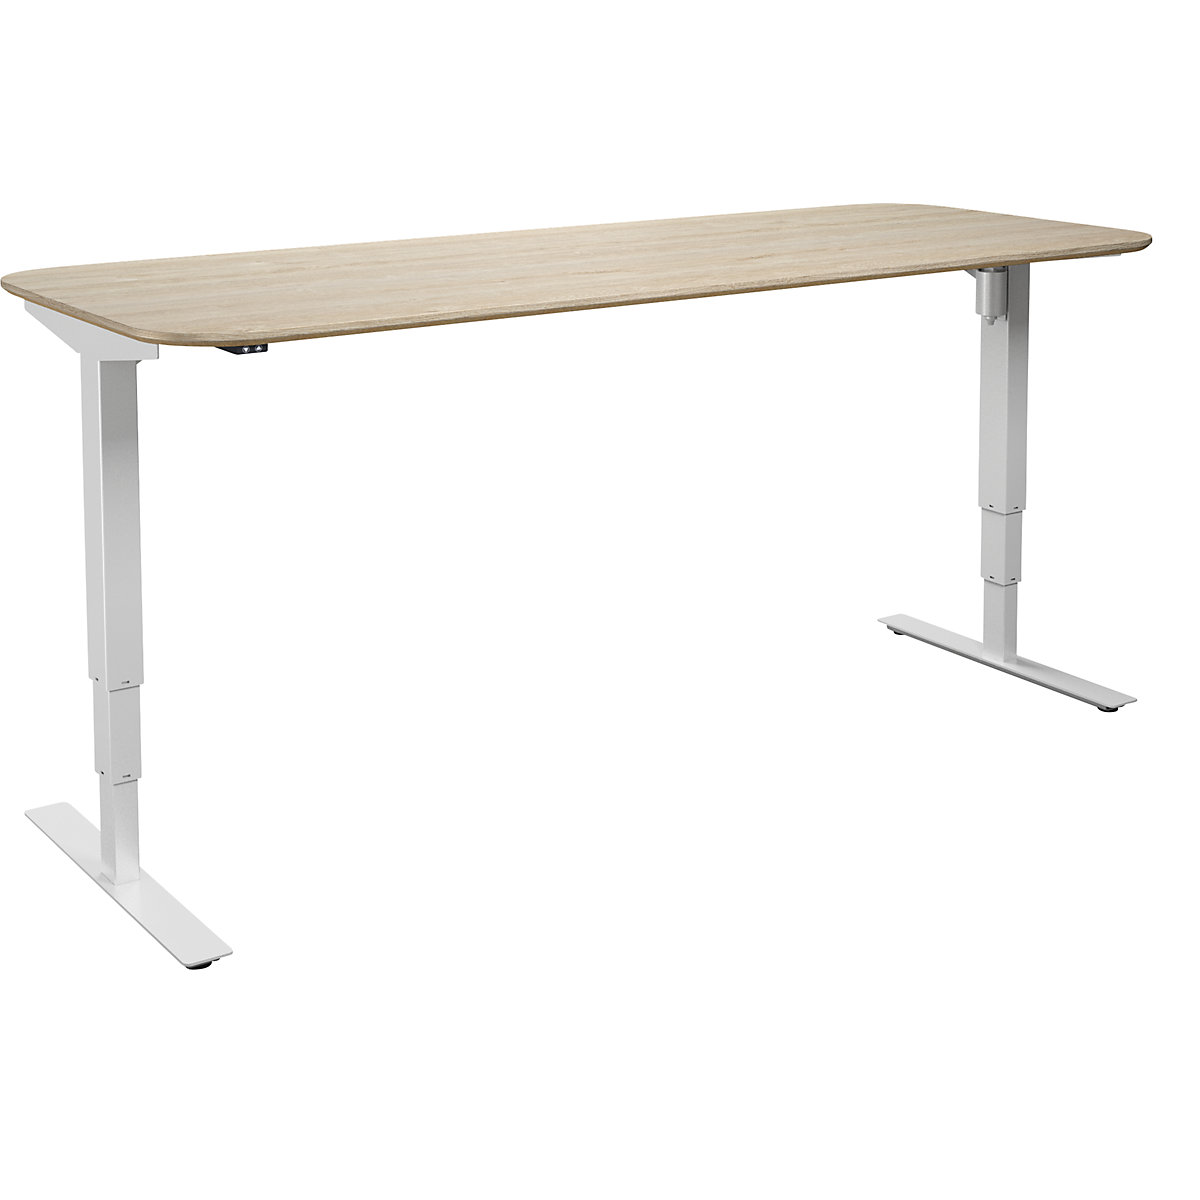 Atlanta Trend desk, electrically height adjustable, straight, rounded corners, WxD 1800 x 800 mm, oak/white-11